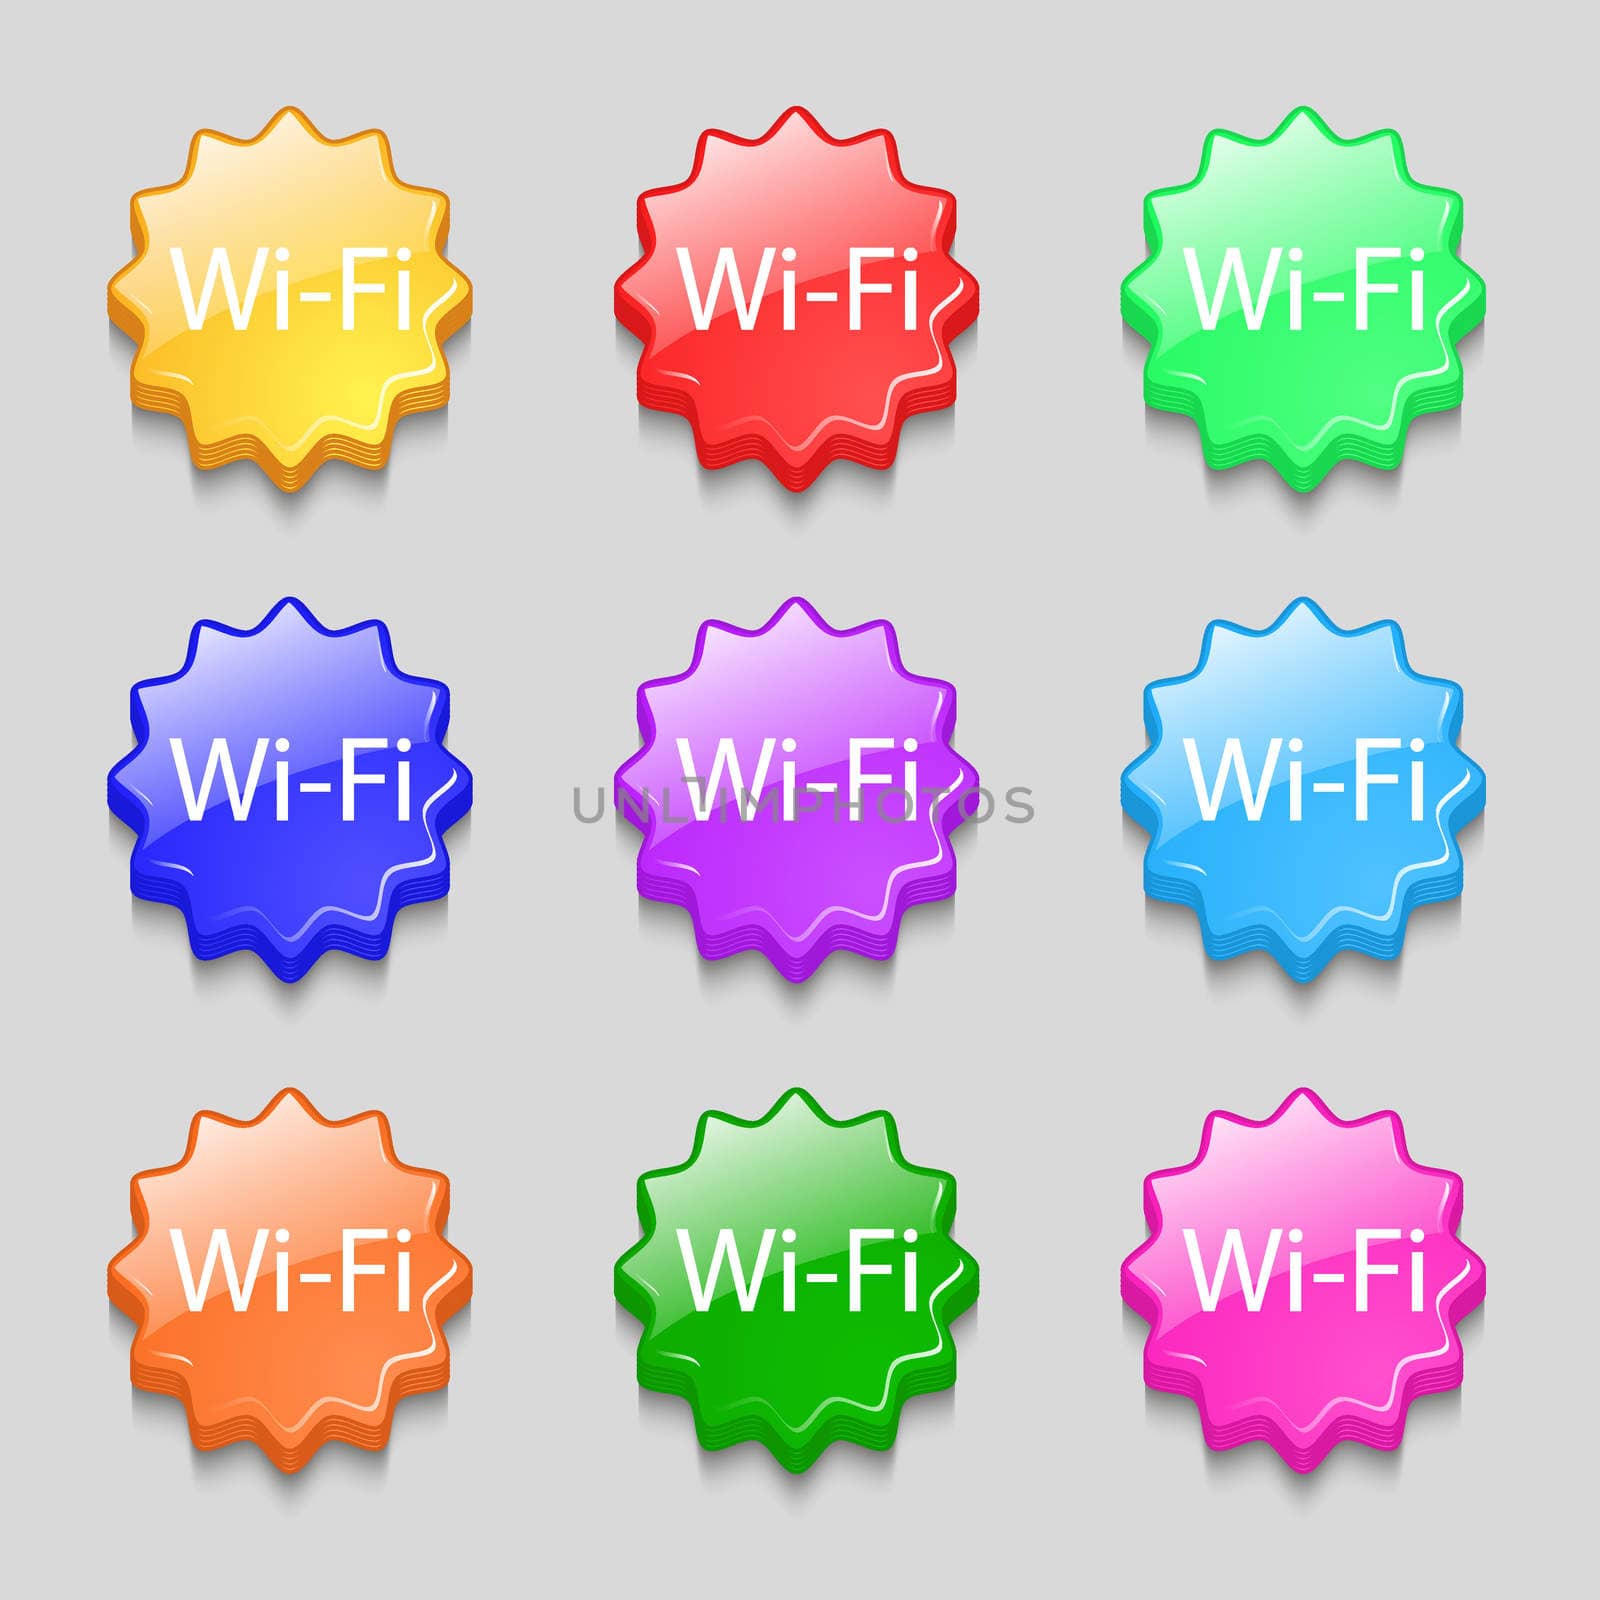 Free wifi sign. Wi-fi symbol. Wireless Network icon. Symbols on nine wavy colourful buttons. illustration